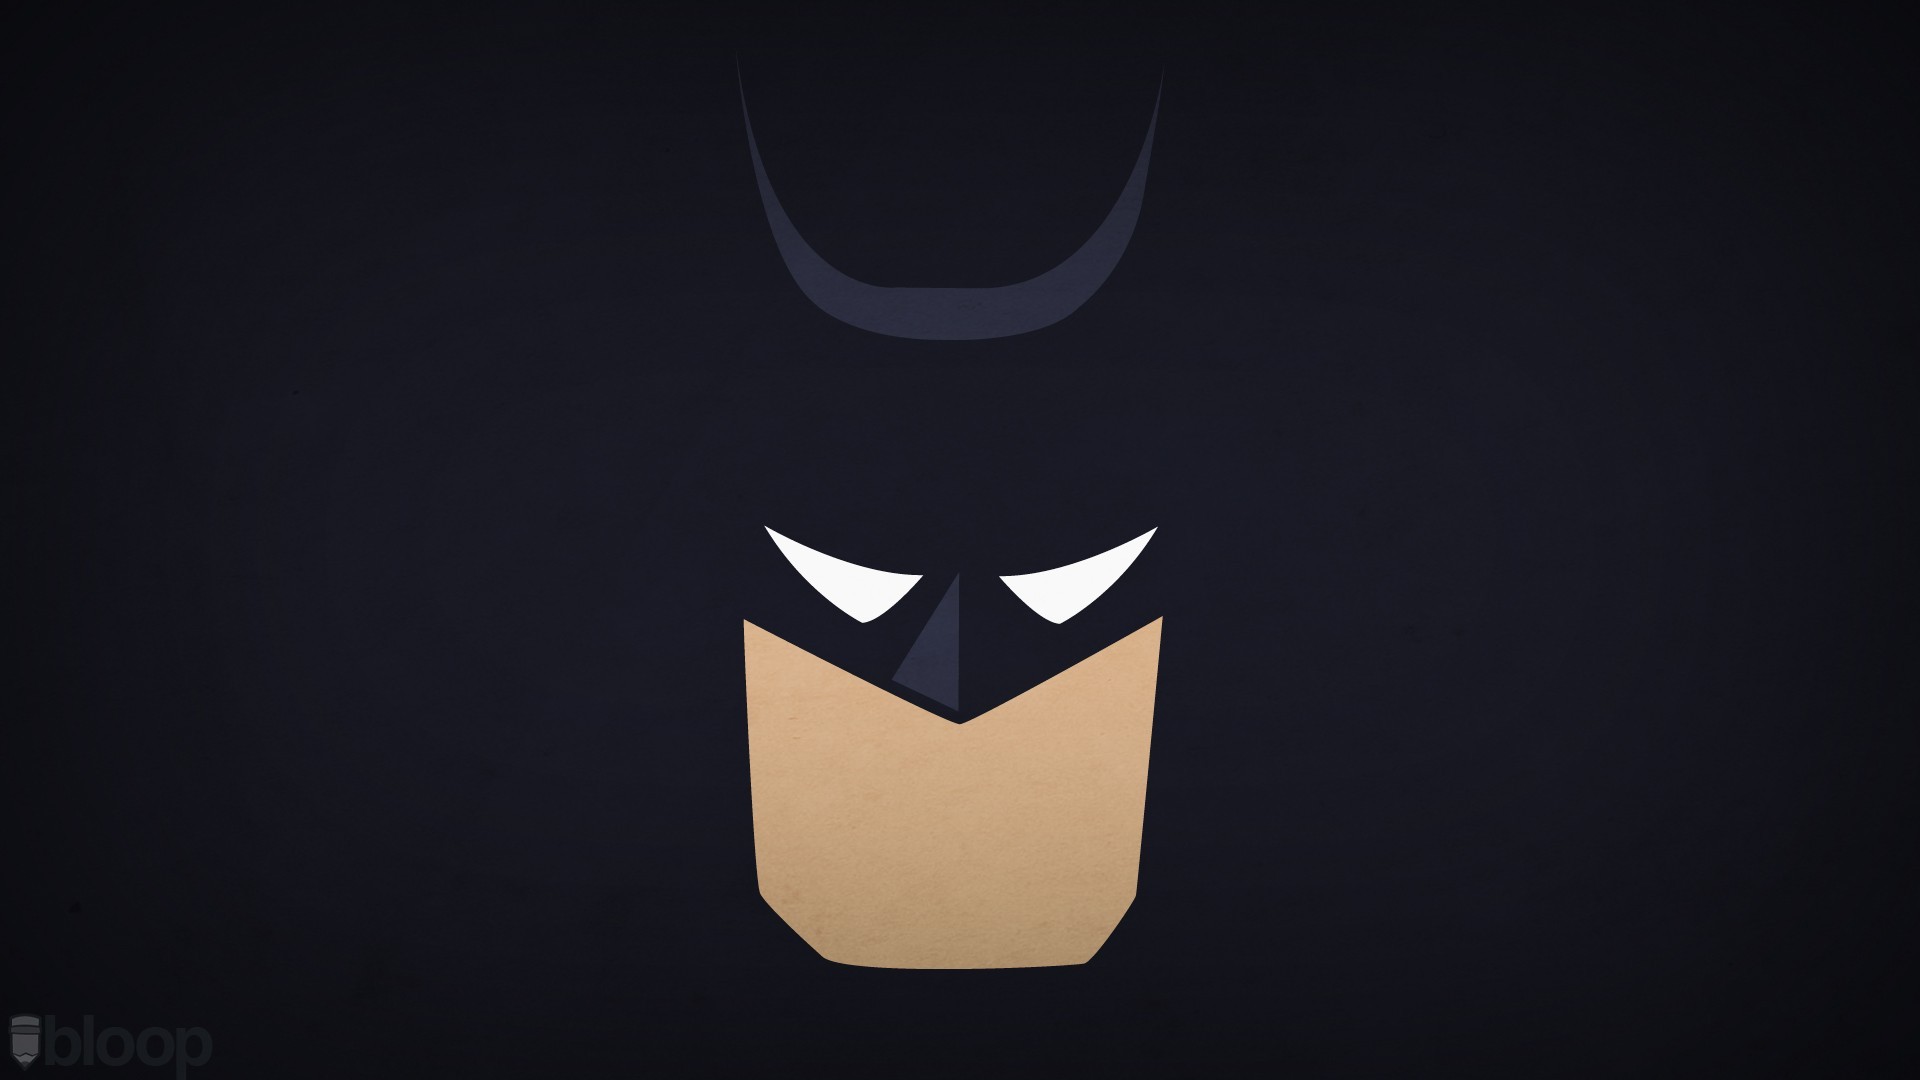 Minimalist Superhero Wallpapers more inside xpost from